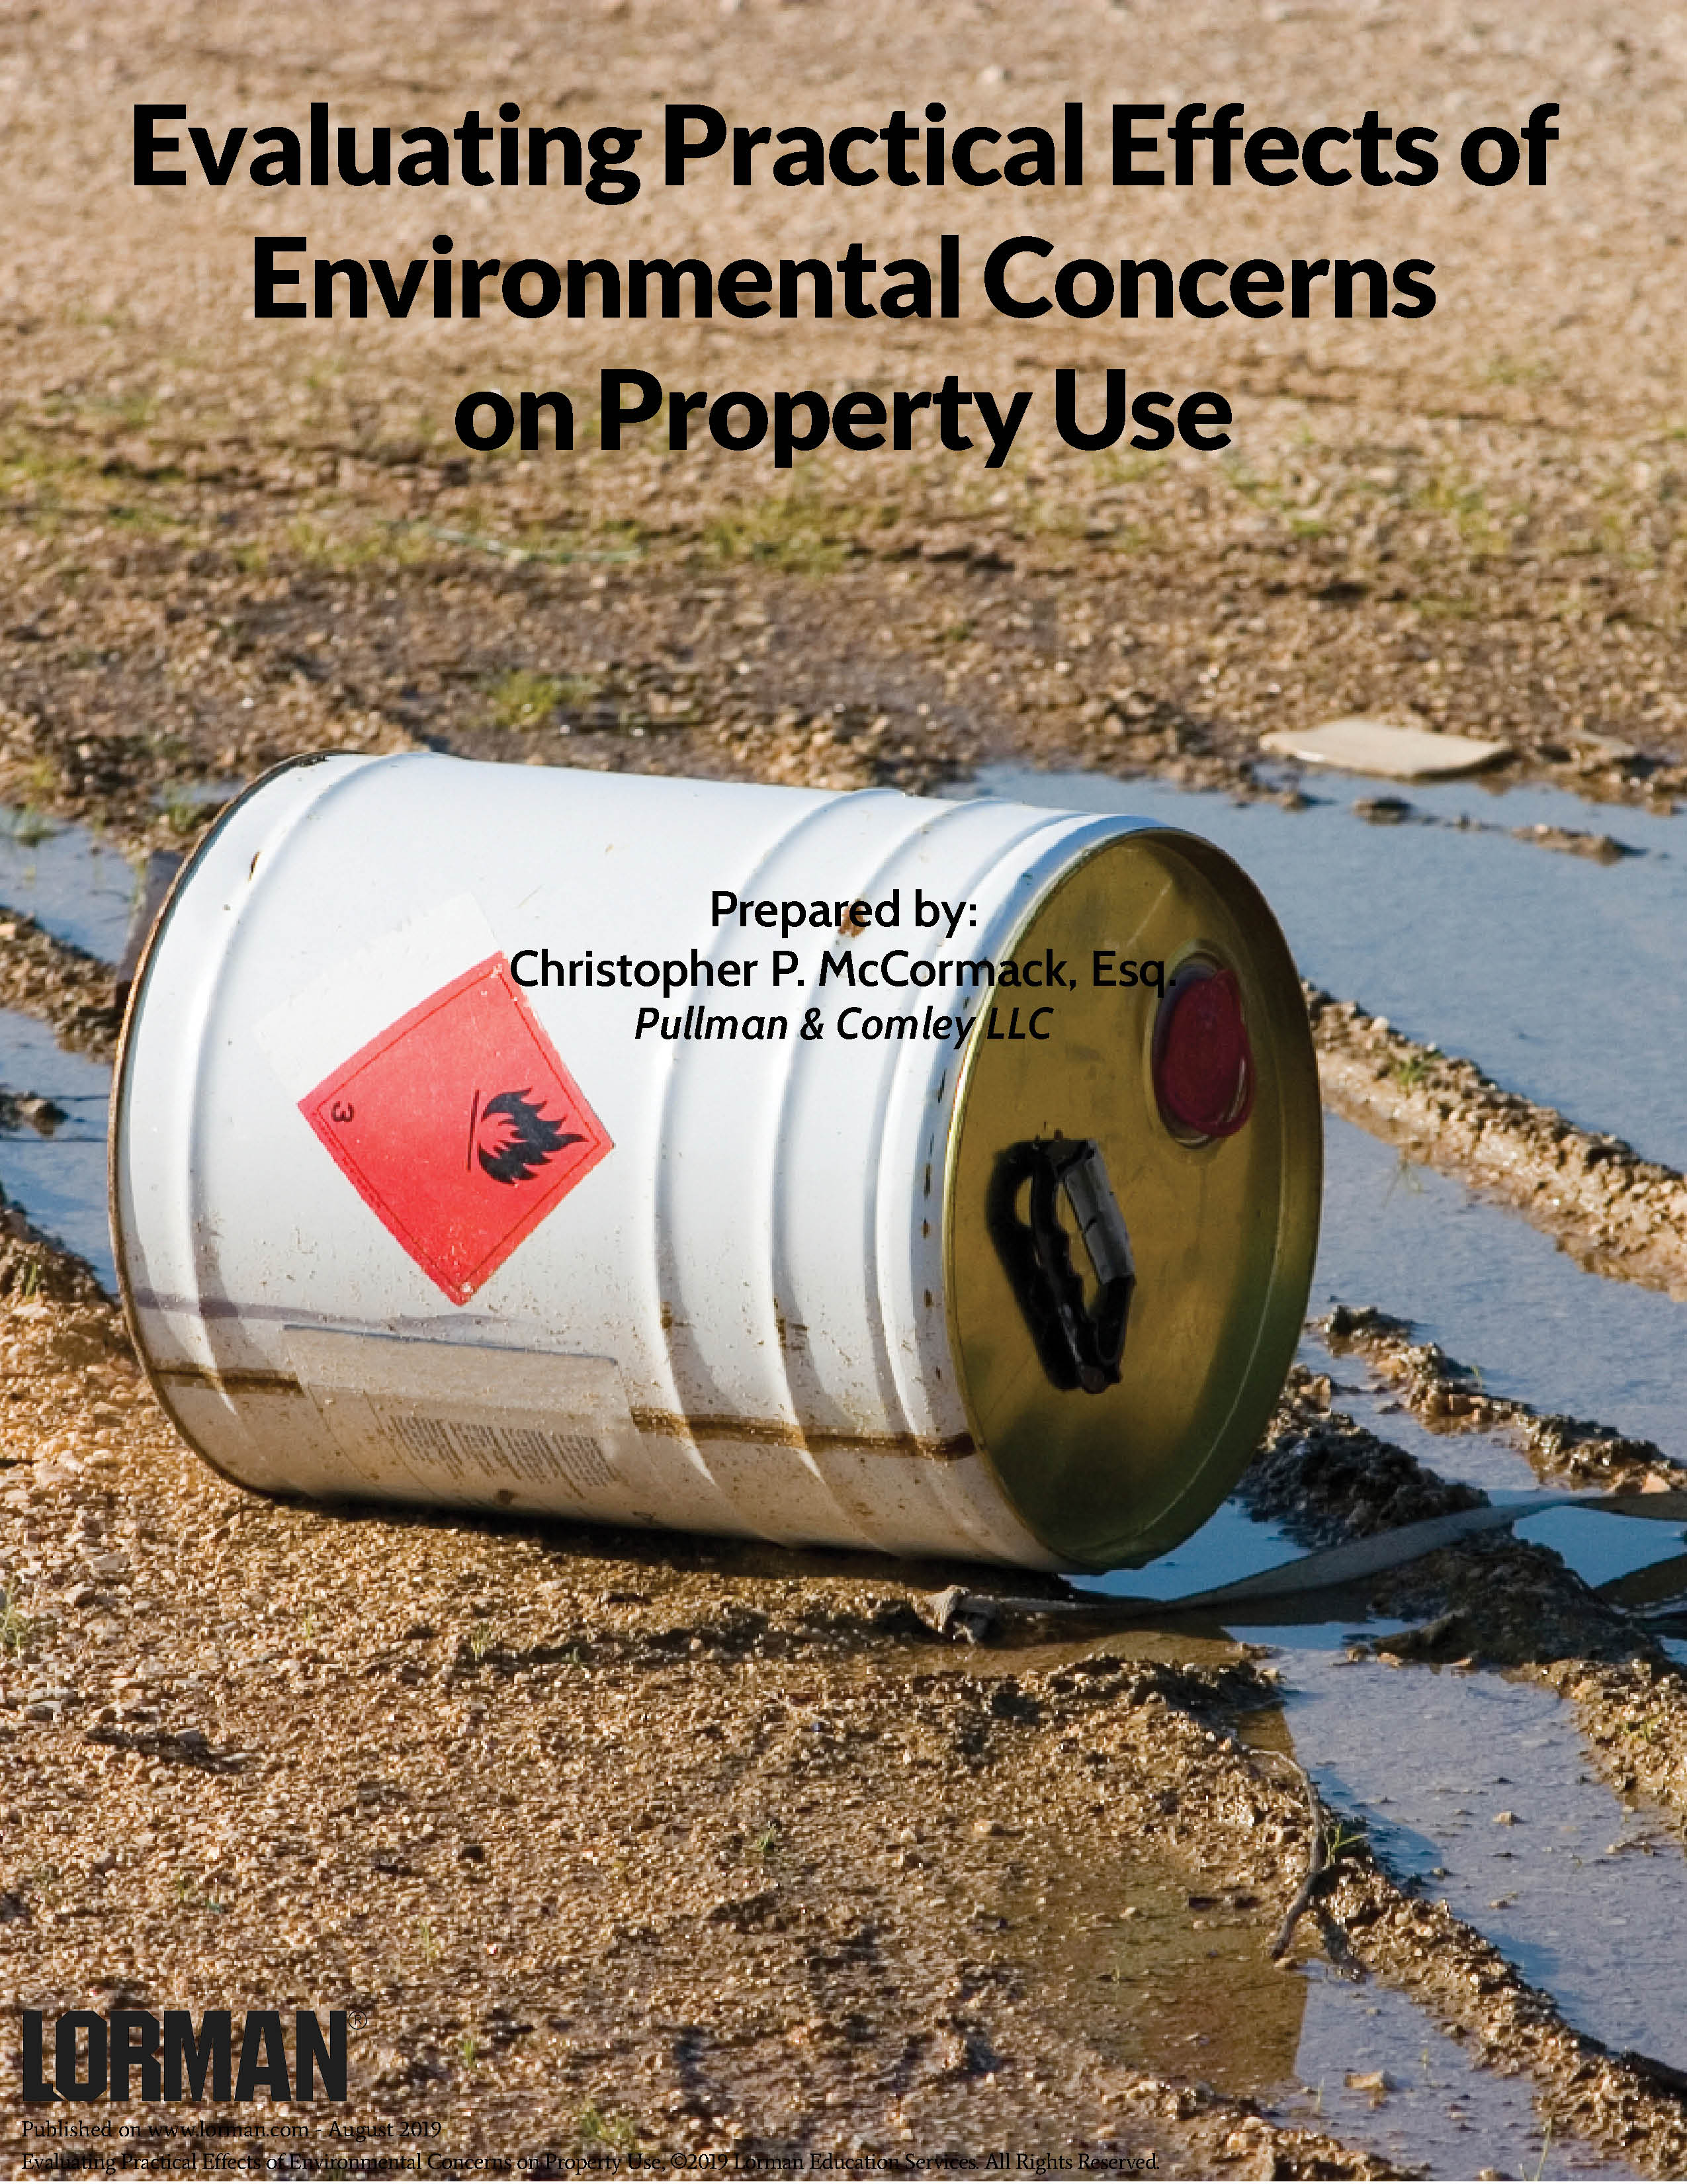 Evaluating Practical Effects of Environmental Concerns on Property Use